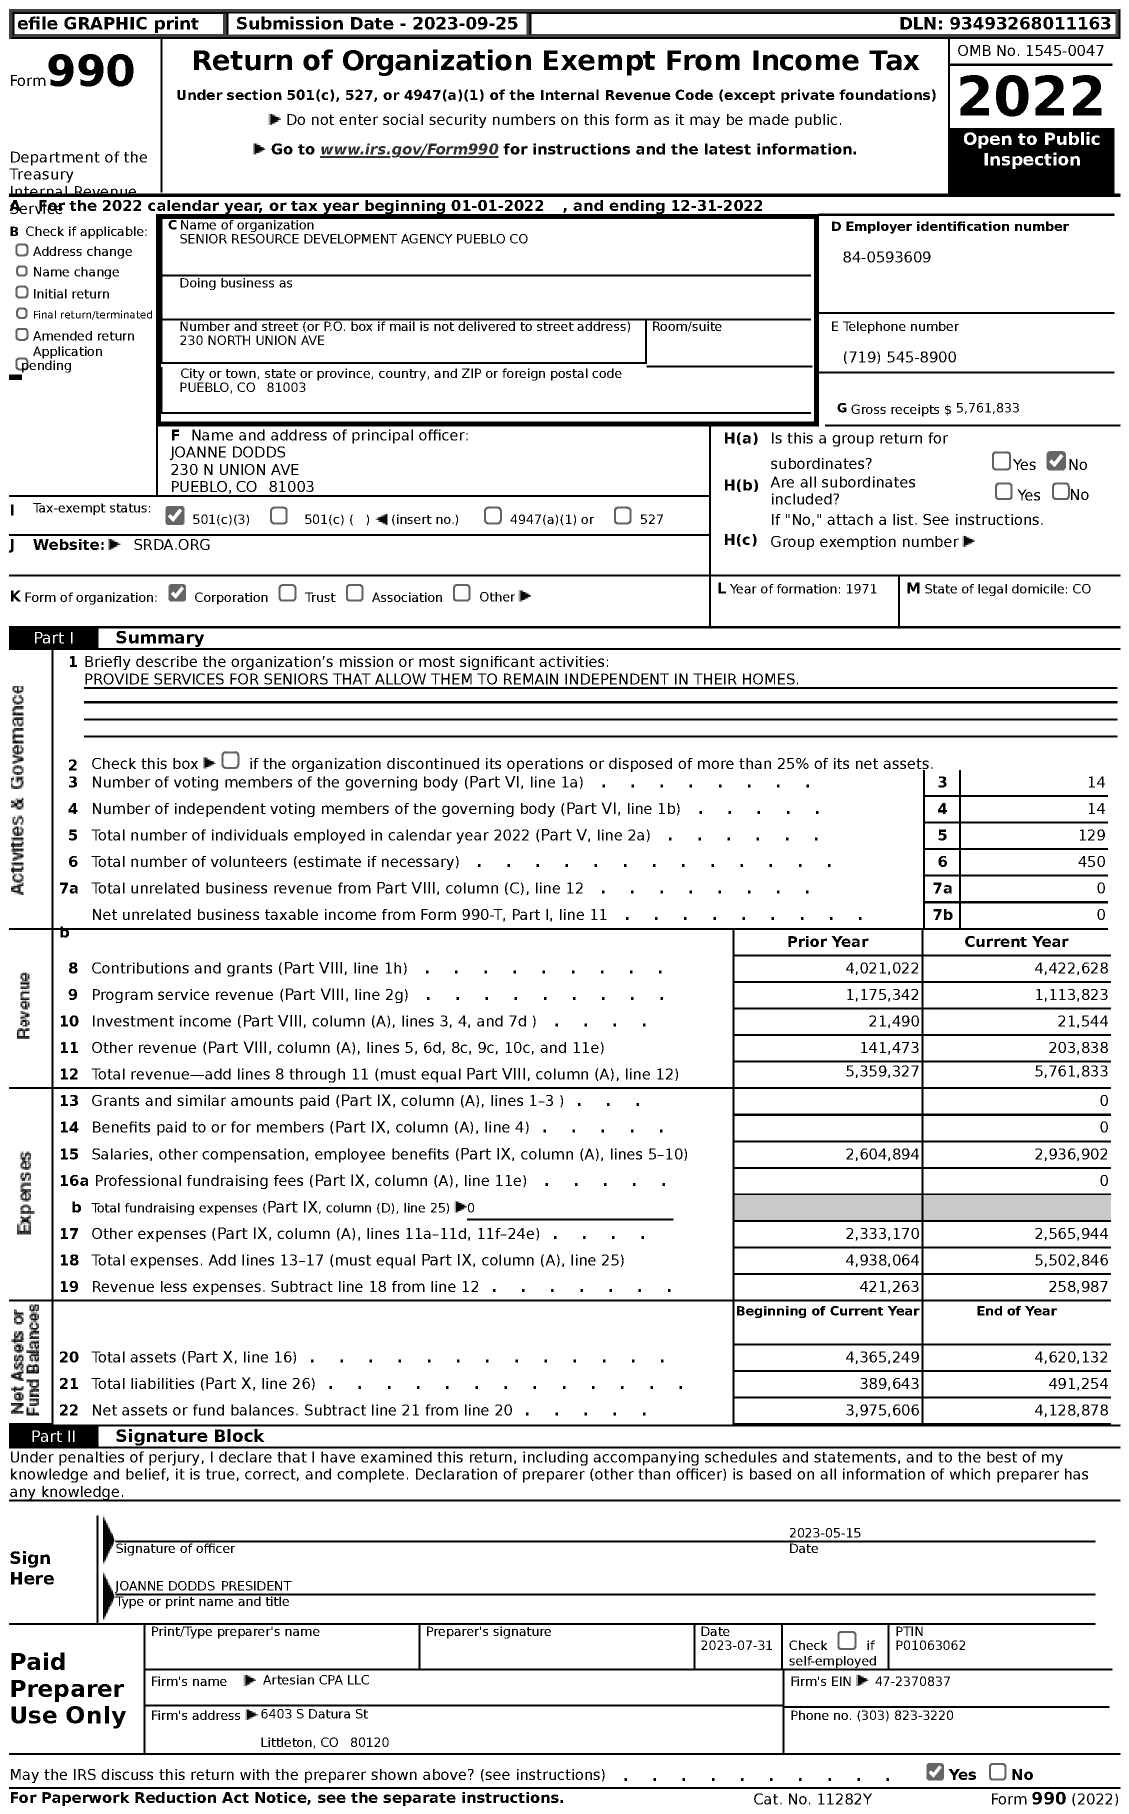 Image of first page of 2022 Form 990 for Senior Resource Development Agency Pueblo